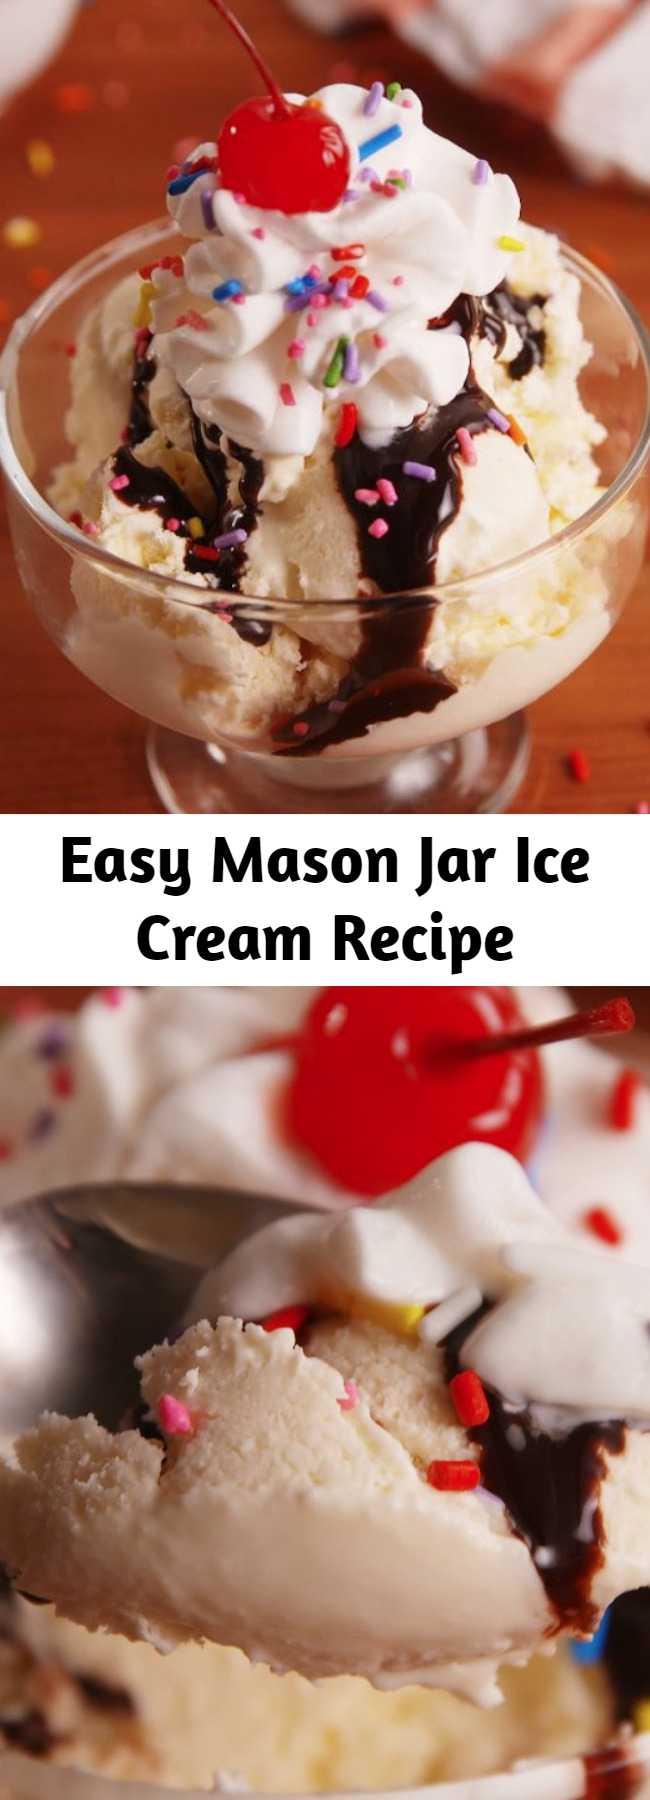 Easy Mason Jar Ice Cream Recipe - Easy to make homemade ice cream with just 4 ingredients. All you need to make this mason jar ice cream is a little elbow grease. No need to scream for ice cream!